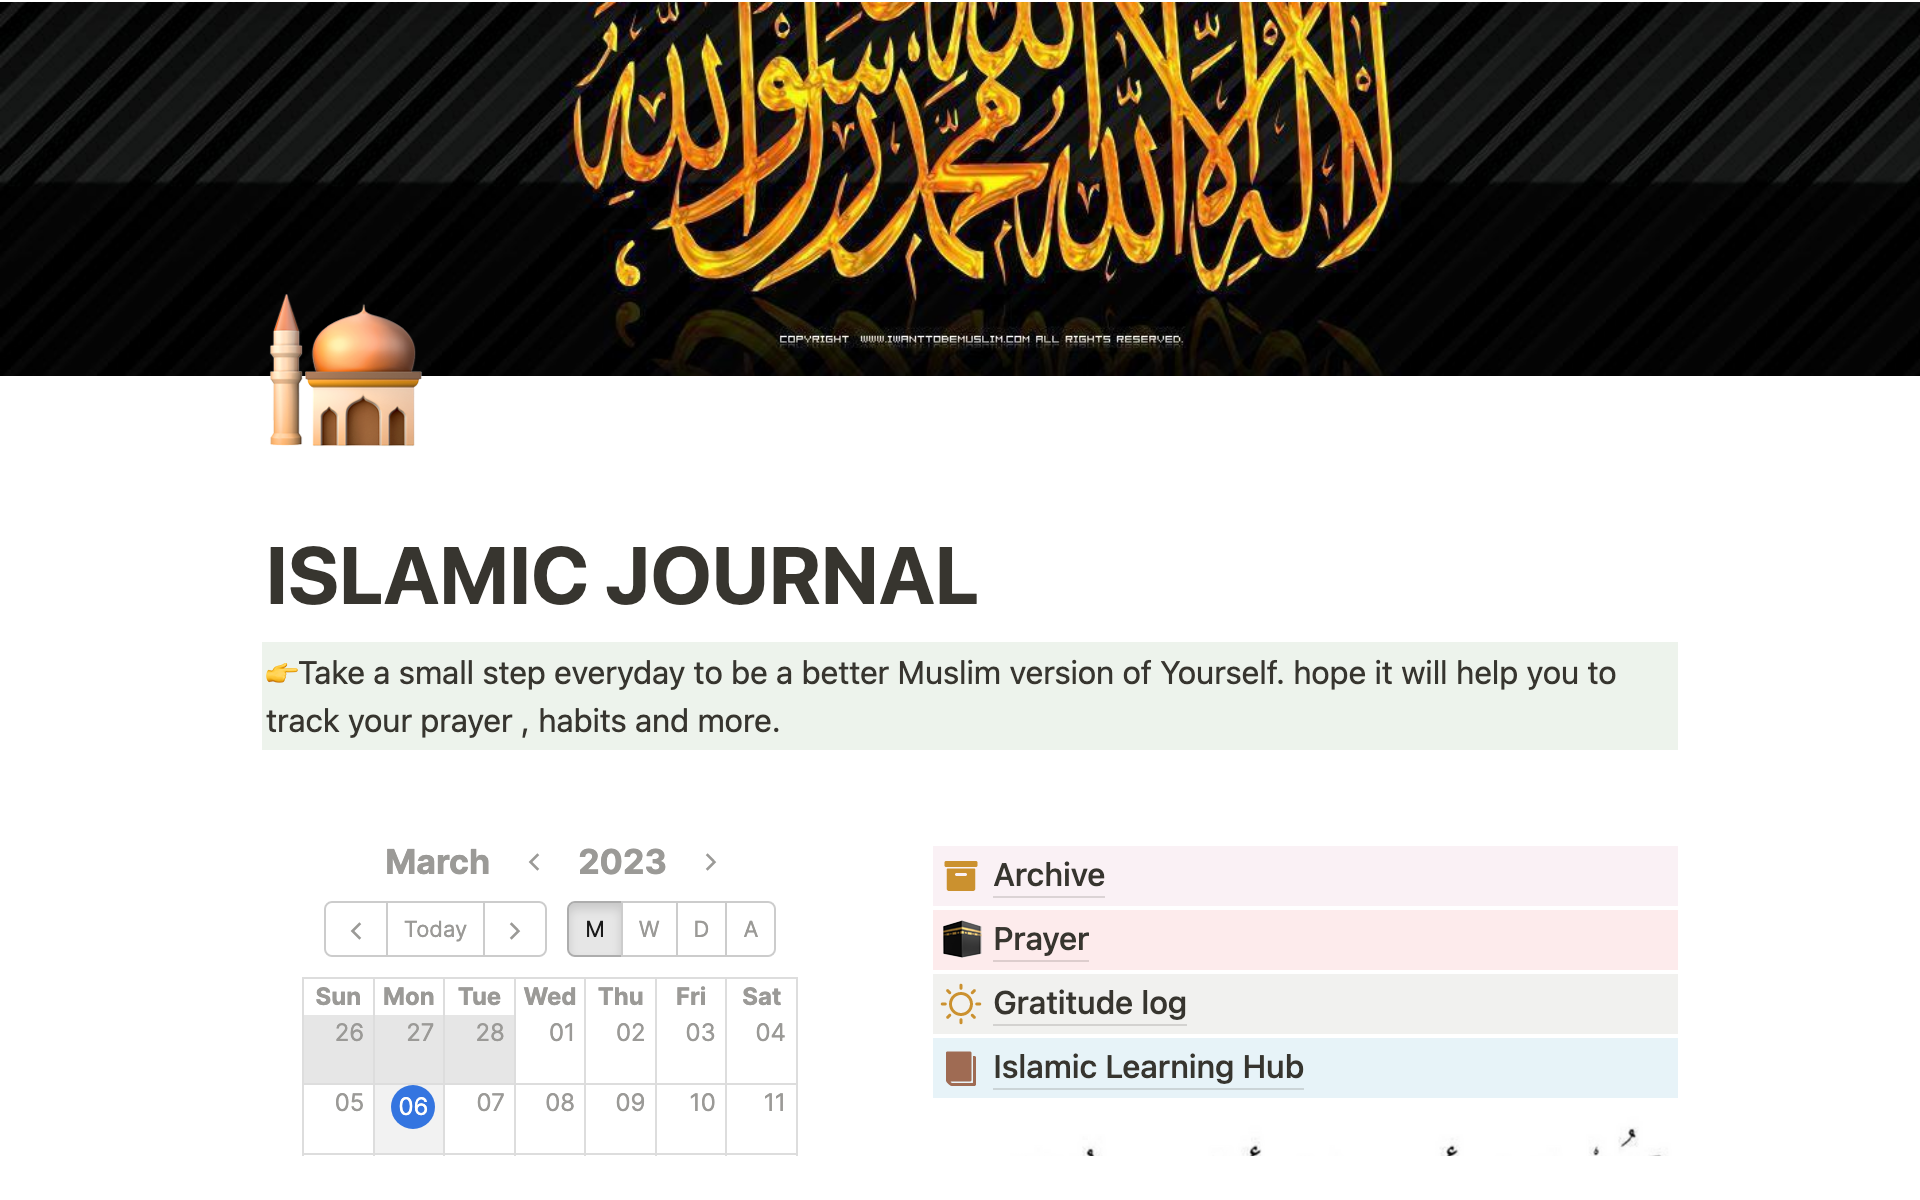 Track your prayer, habits and learning.